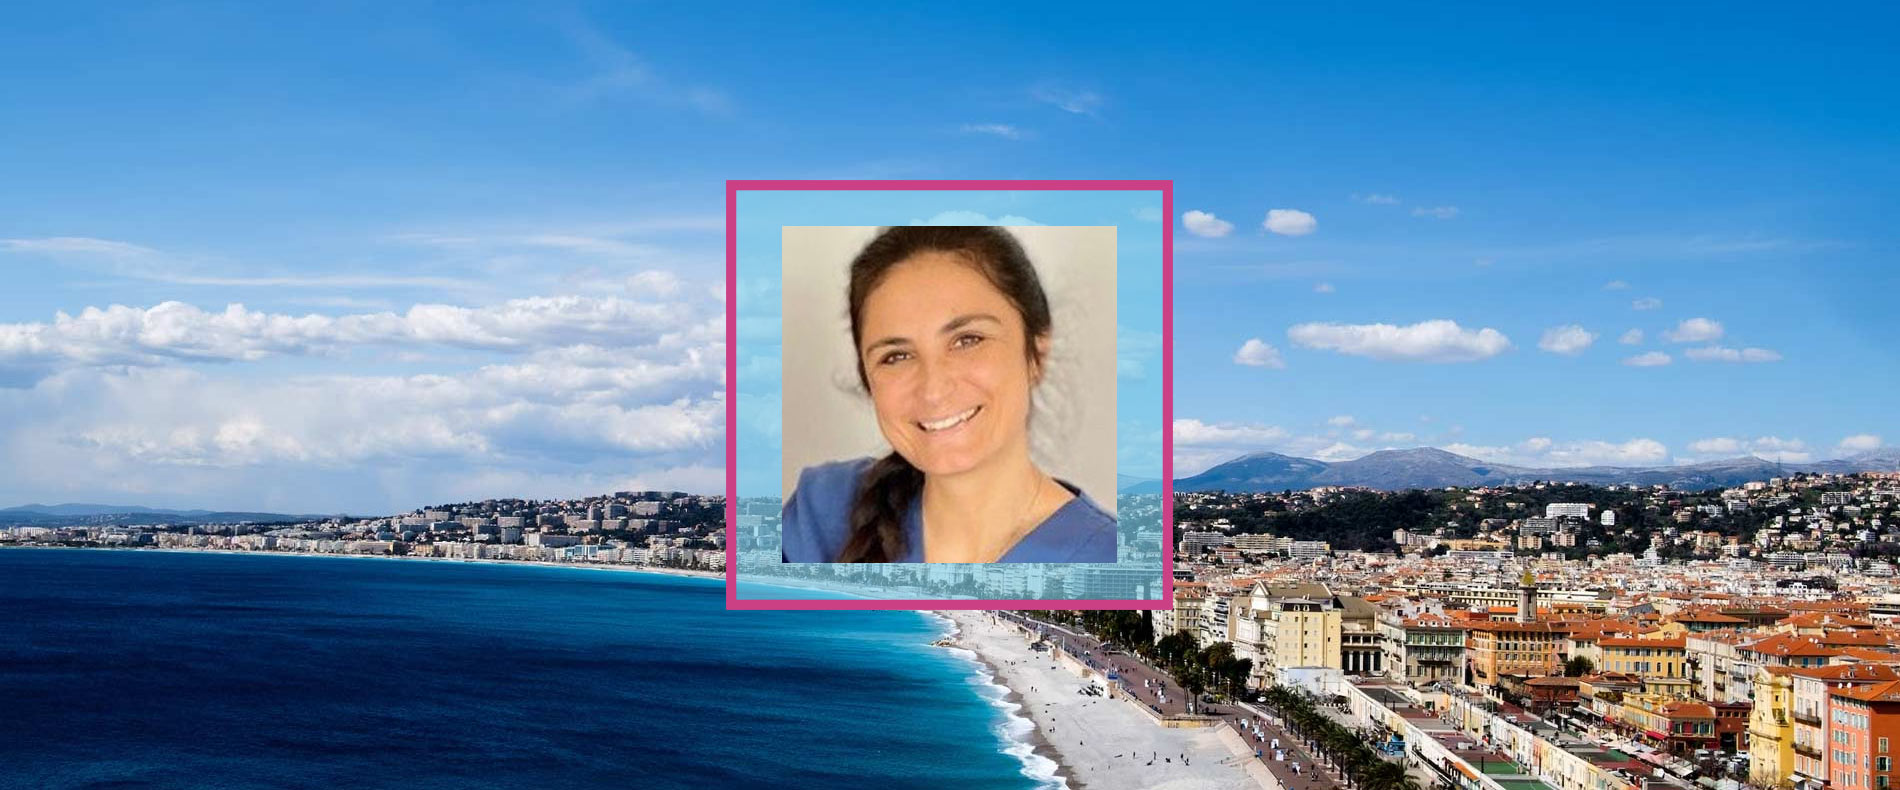 Dr. Marta Leiva: A Speaker Profile on Combatting Ophthalmic Issues in Animal Leishmaniosis